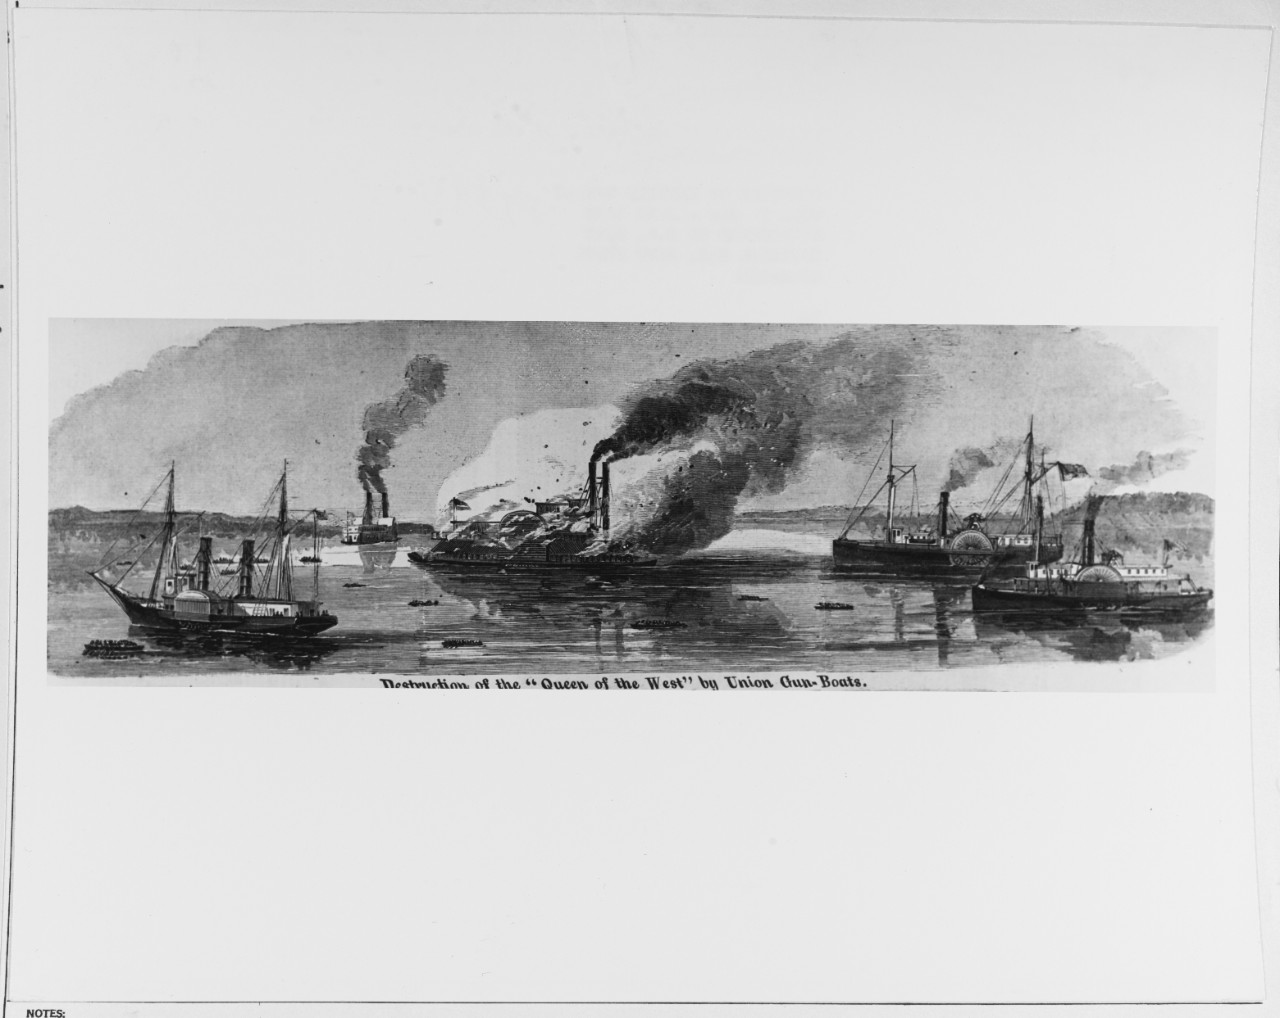 NH 58759 Destruction of the 'Queen of the West' by Union Gun-Boats Line engraving published in Harper's Weekly, 1863, depicting CSS Queen of the West being destroyed in Grand Lake, Louisiana, during an attack by USS Estrella (extreme left), Calhoun (extreme right) and Arizona (second from right), 14 April 1863.